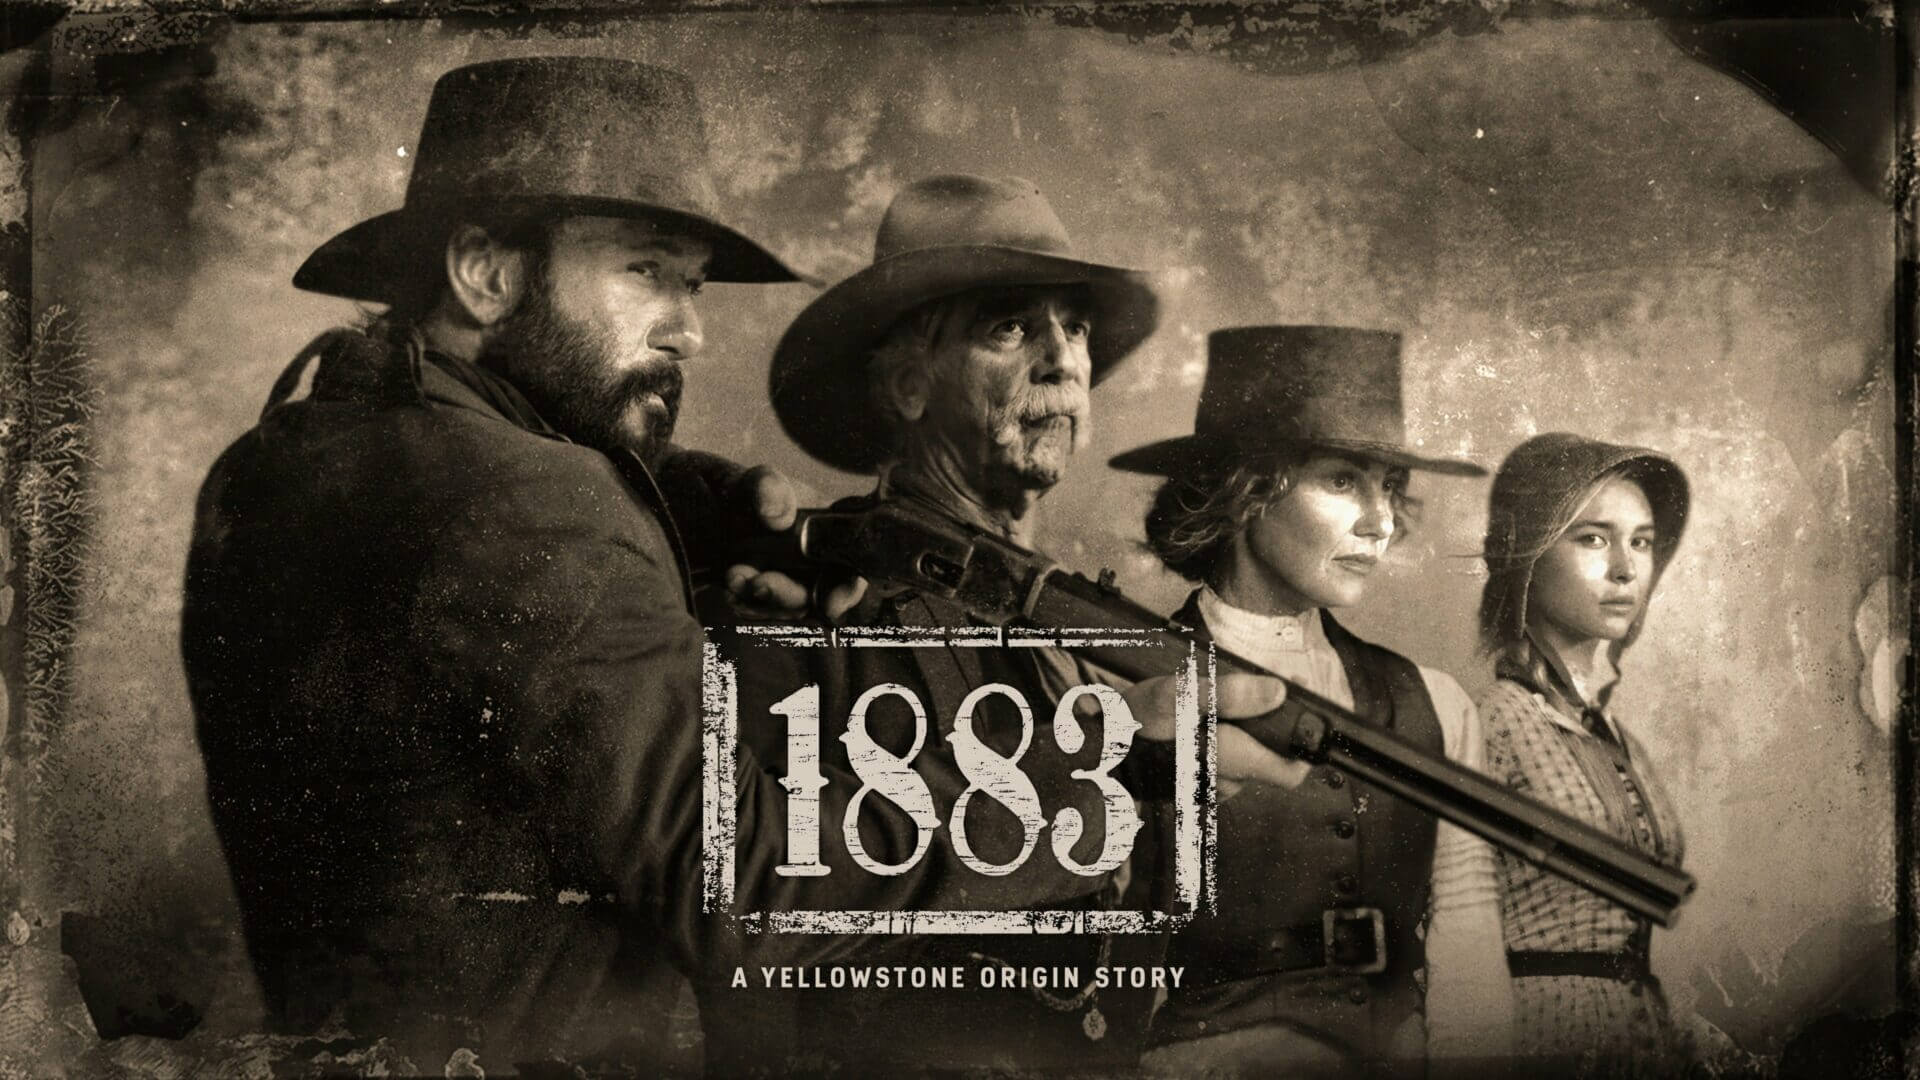 Where To Watch 1883?